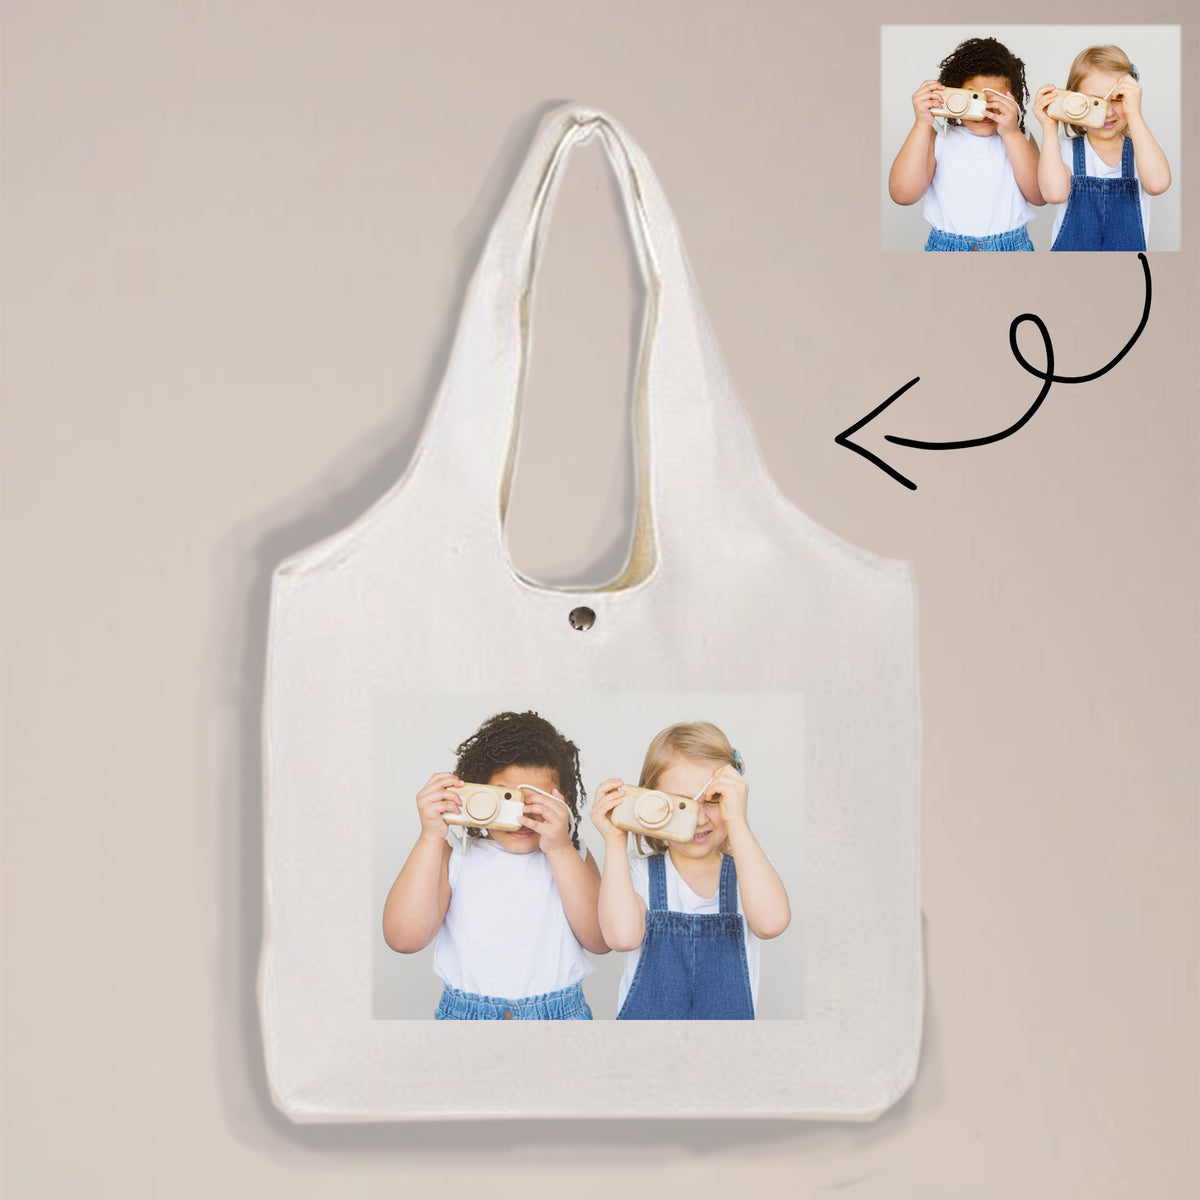 School Icons Cotton Tote Bag by Shutterfly